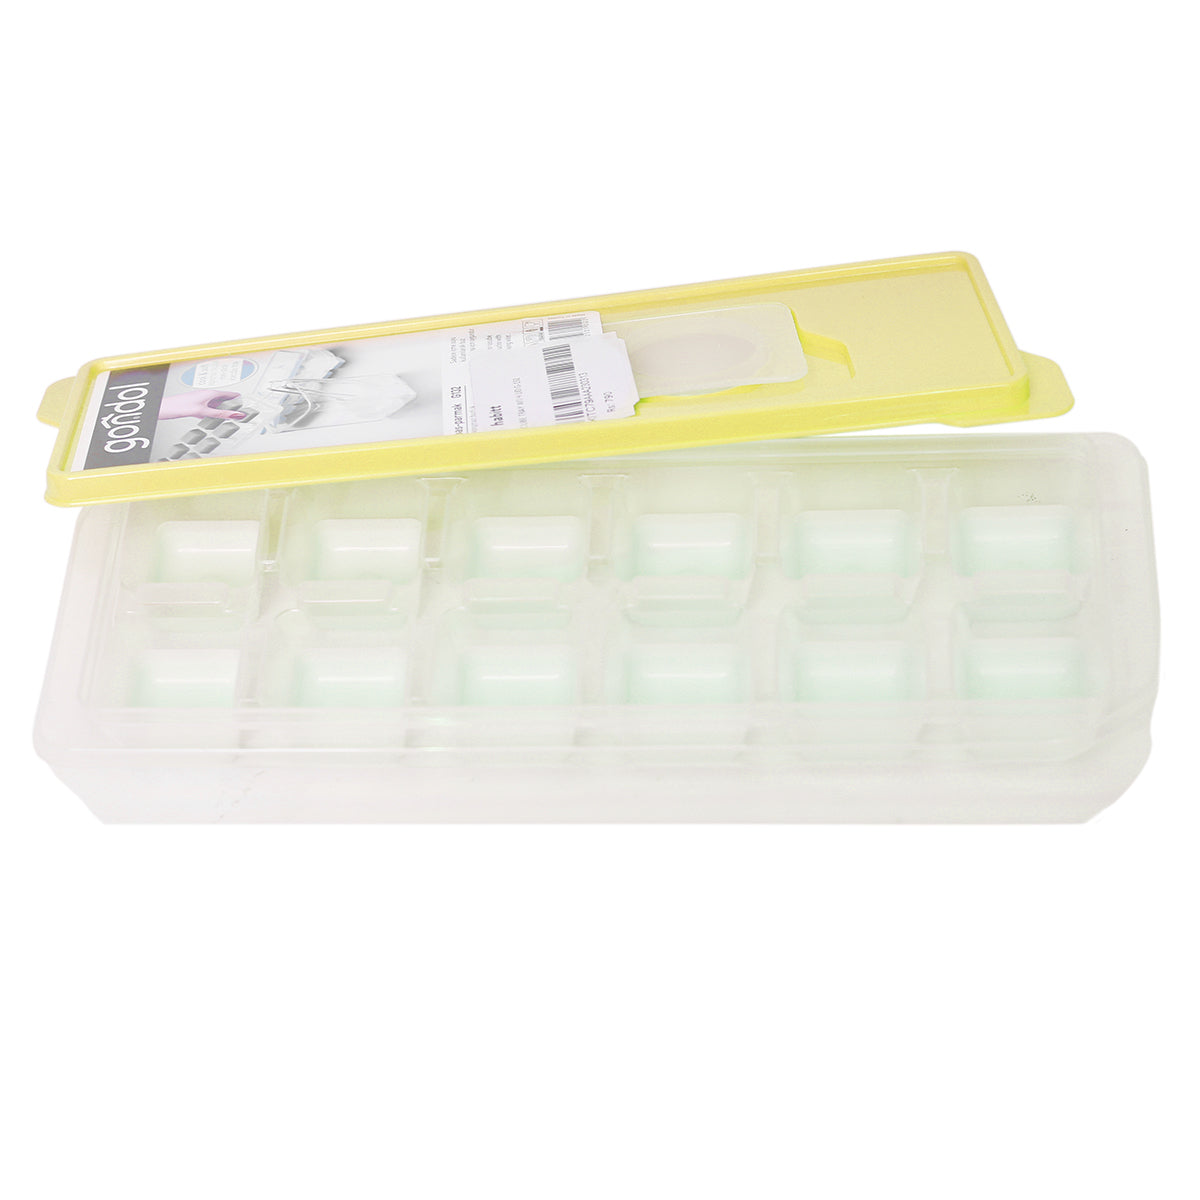 ICECUBE TRAY WITH LID.G-132